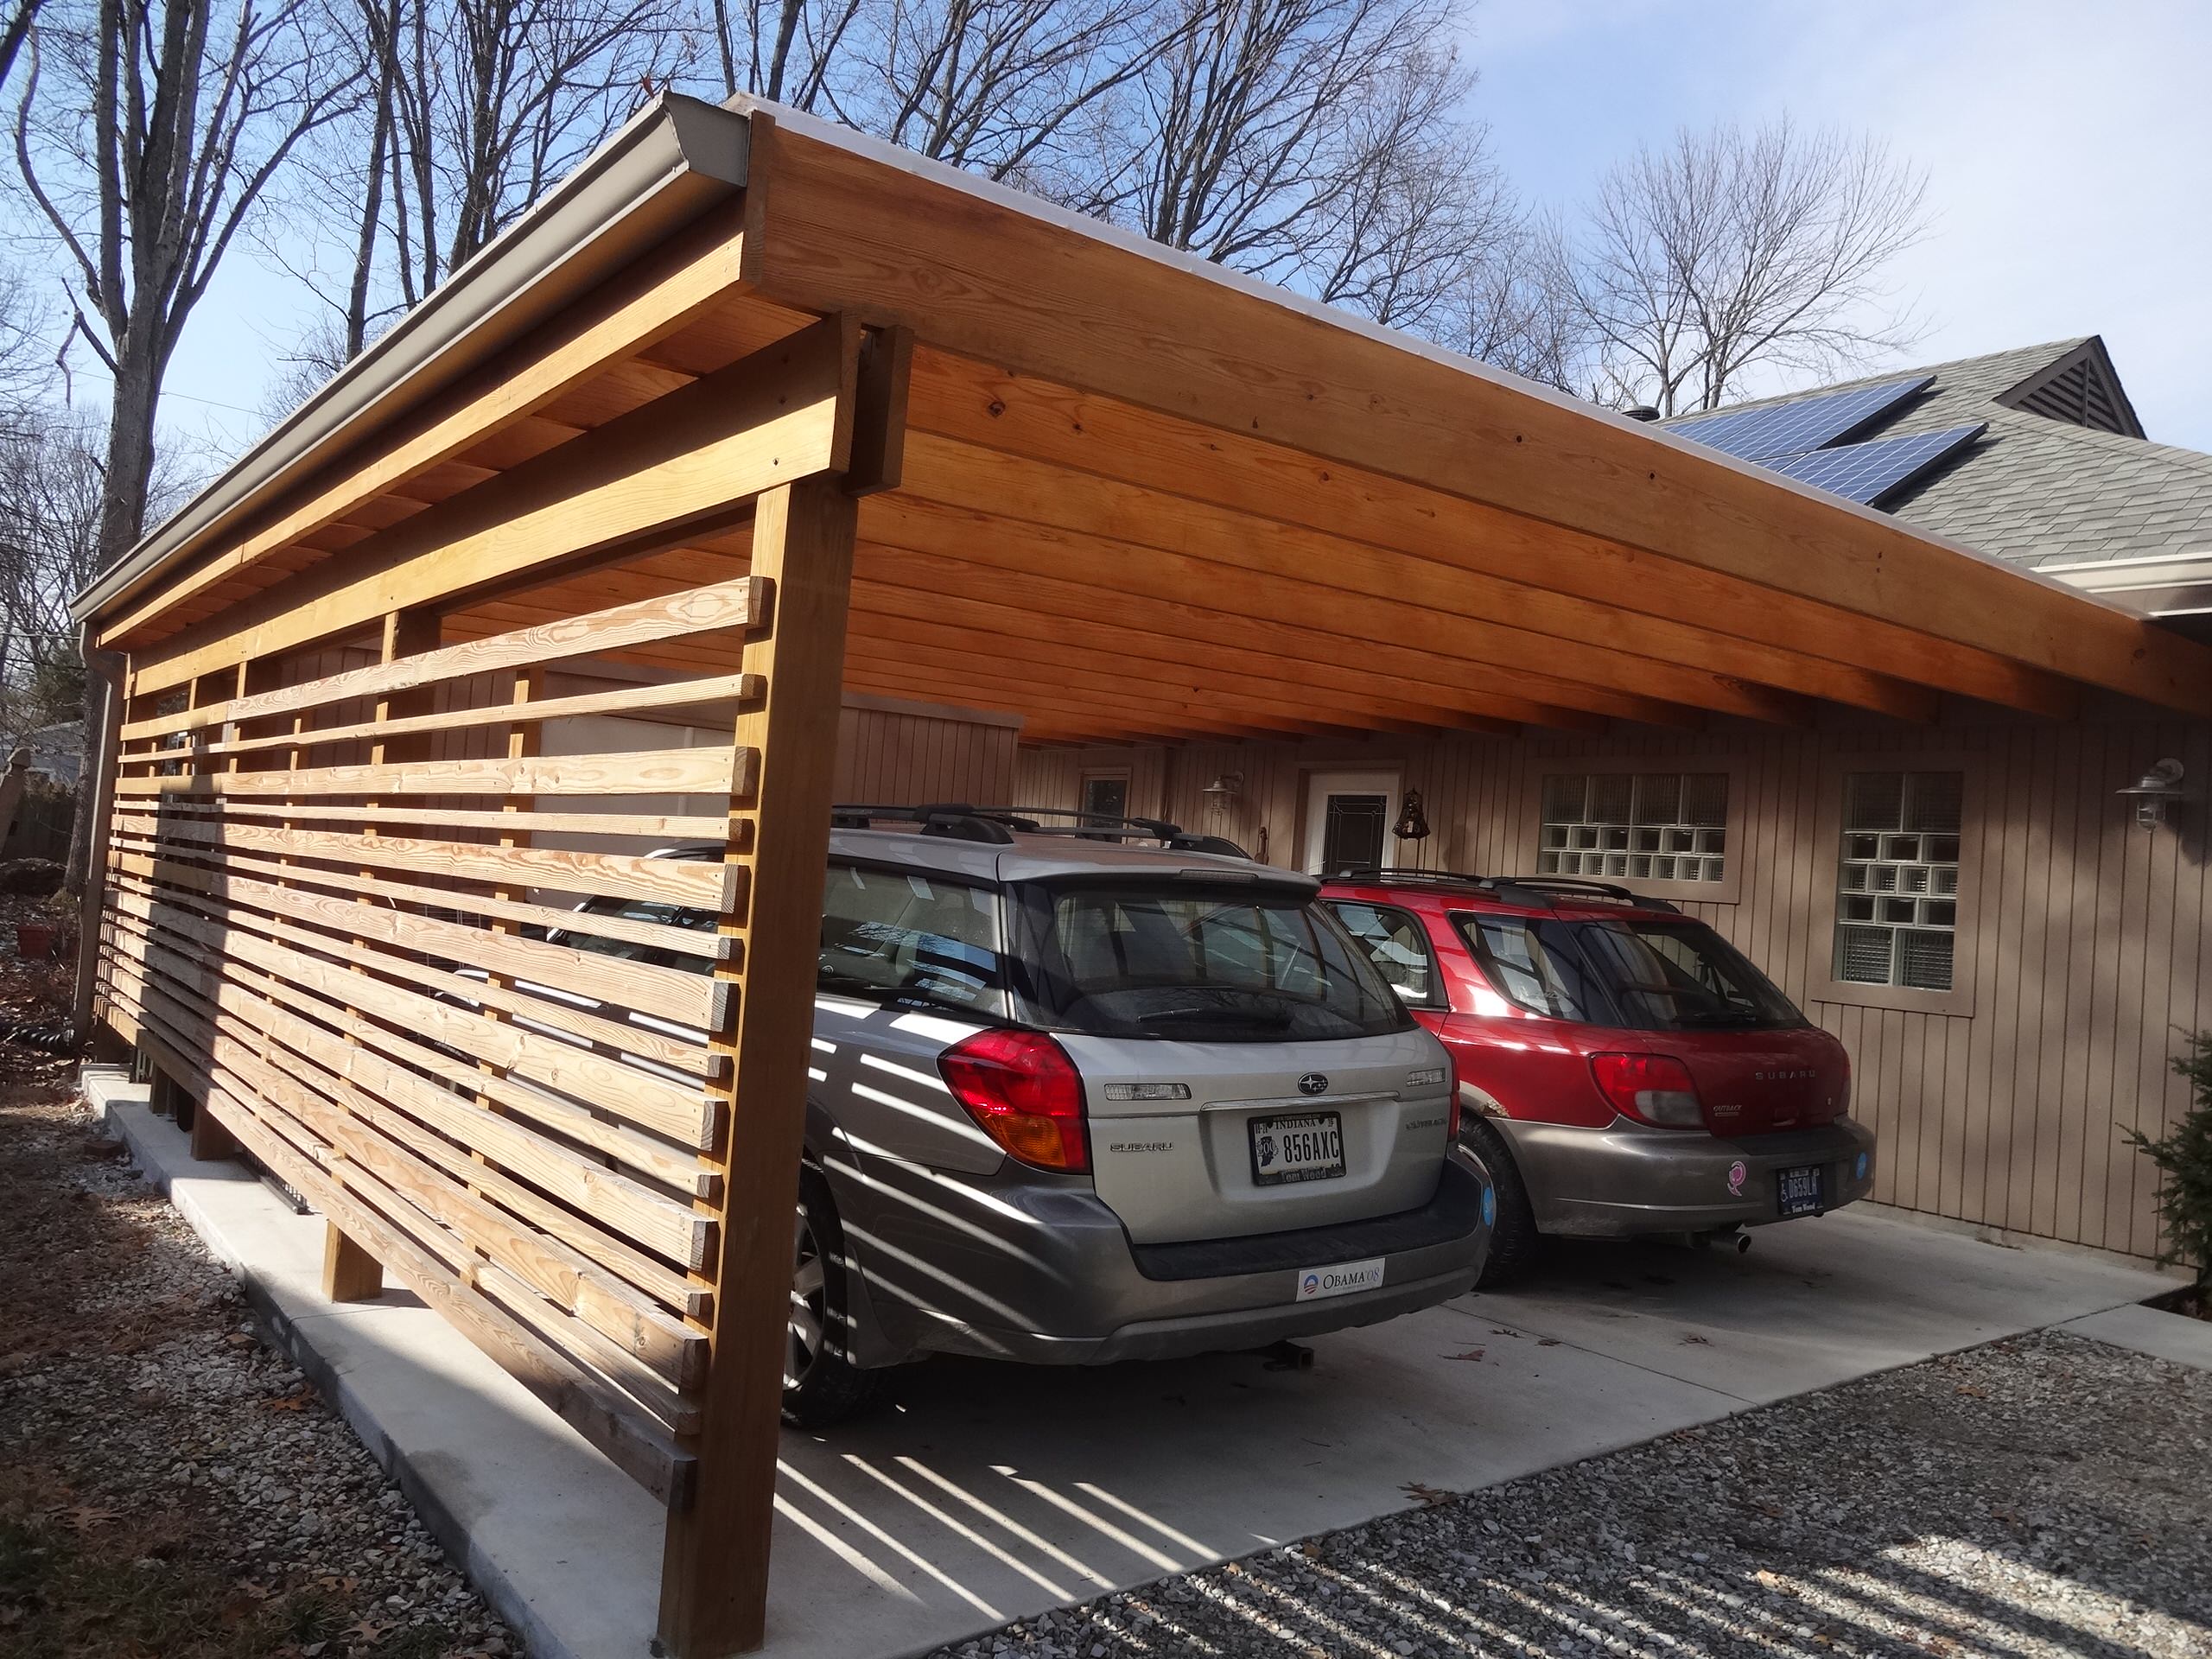 Mid Century Modern Carport Greyslate Provided Construction Services Midcentury Garage Indianapolis By Greyslate Building Group Llc Houzz